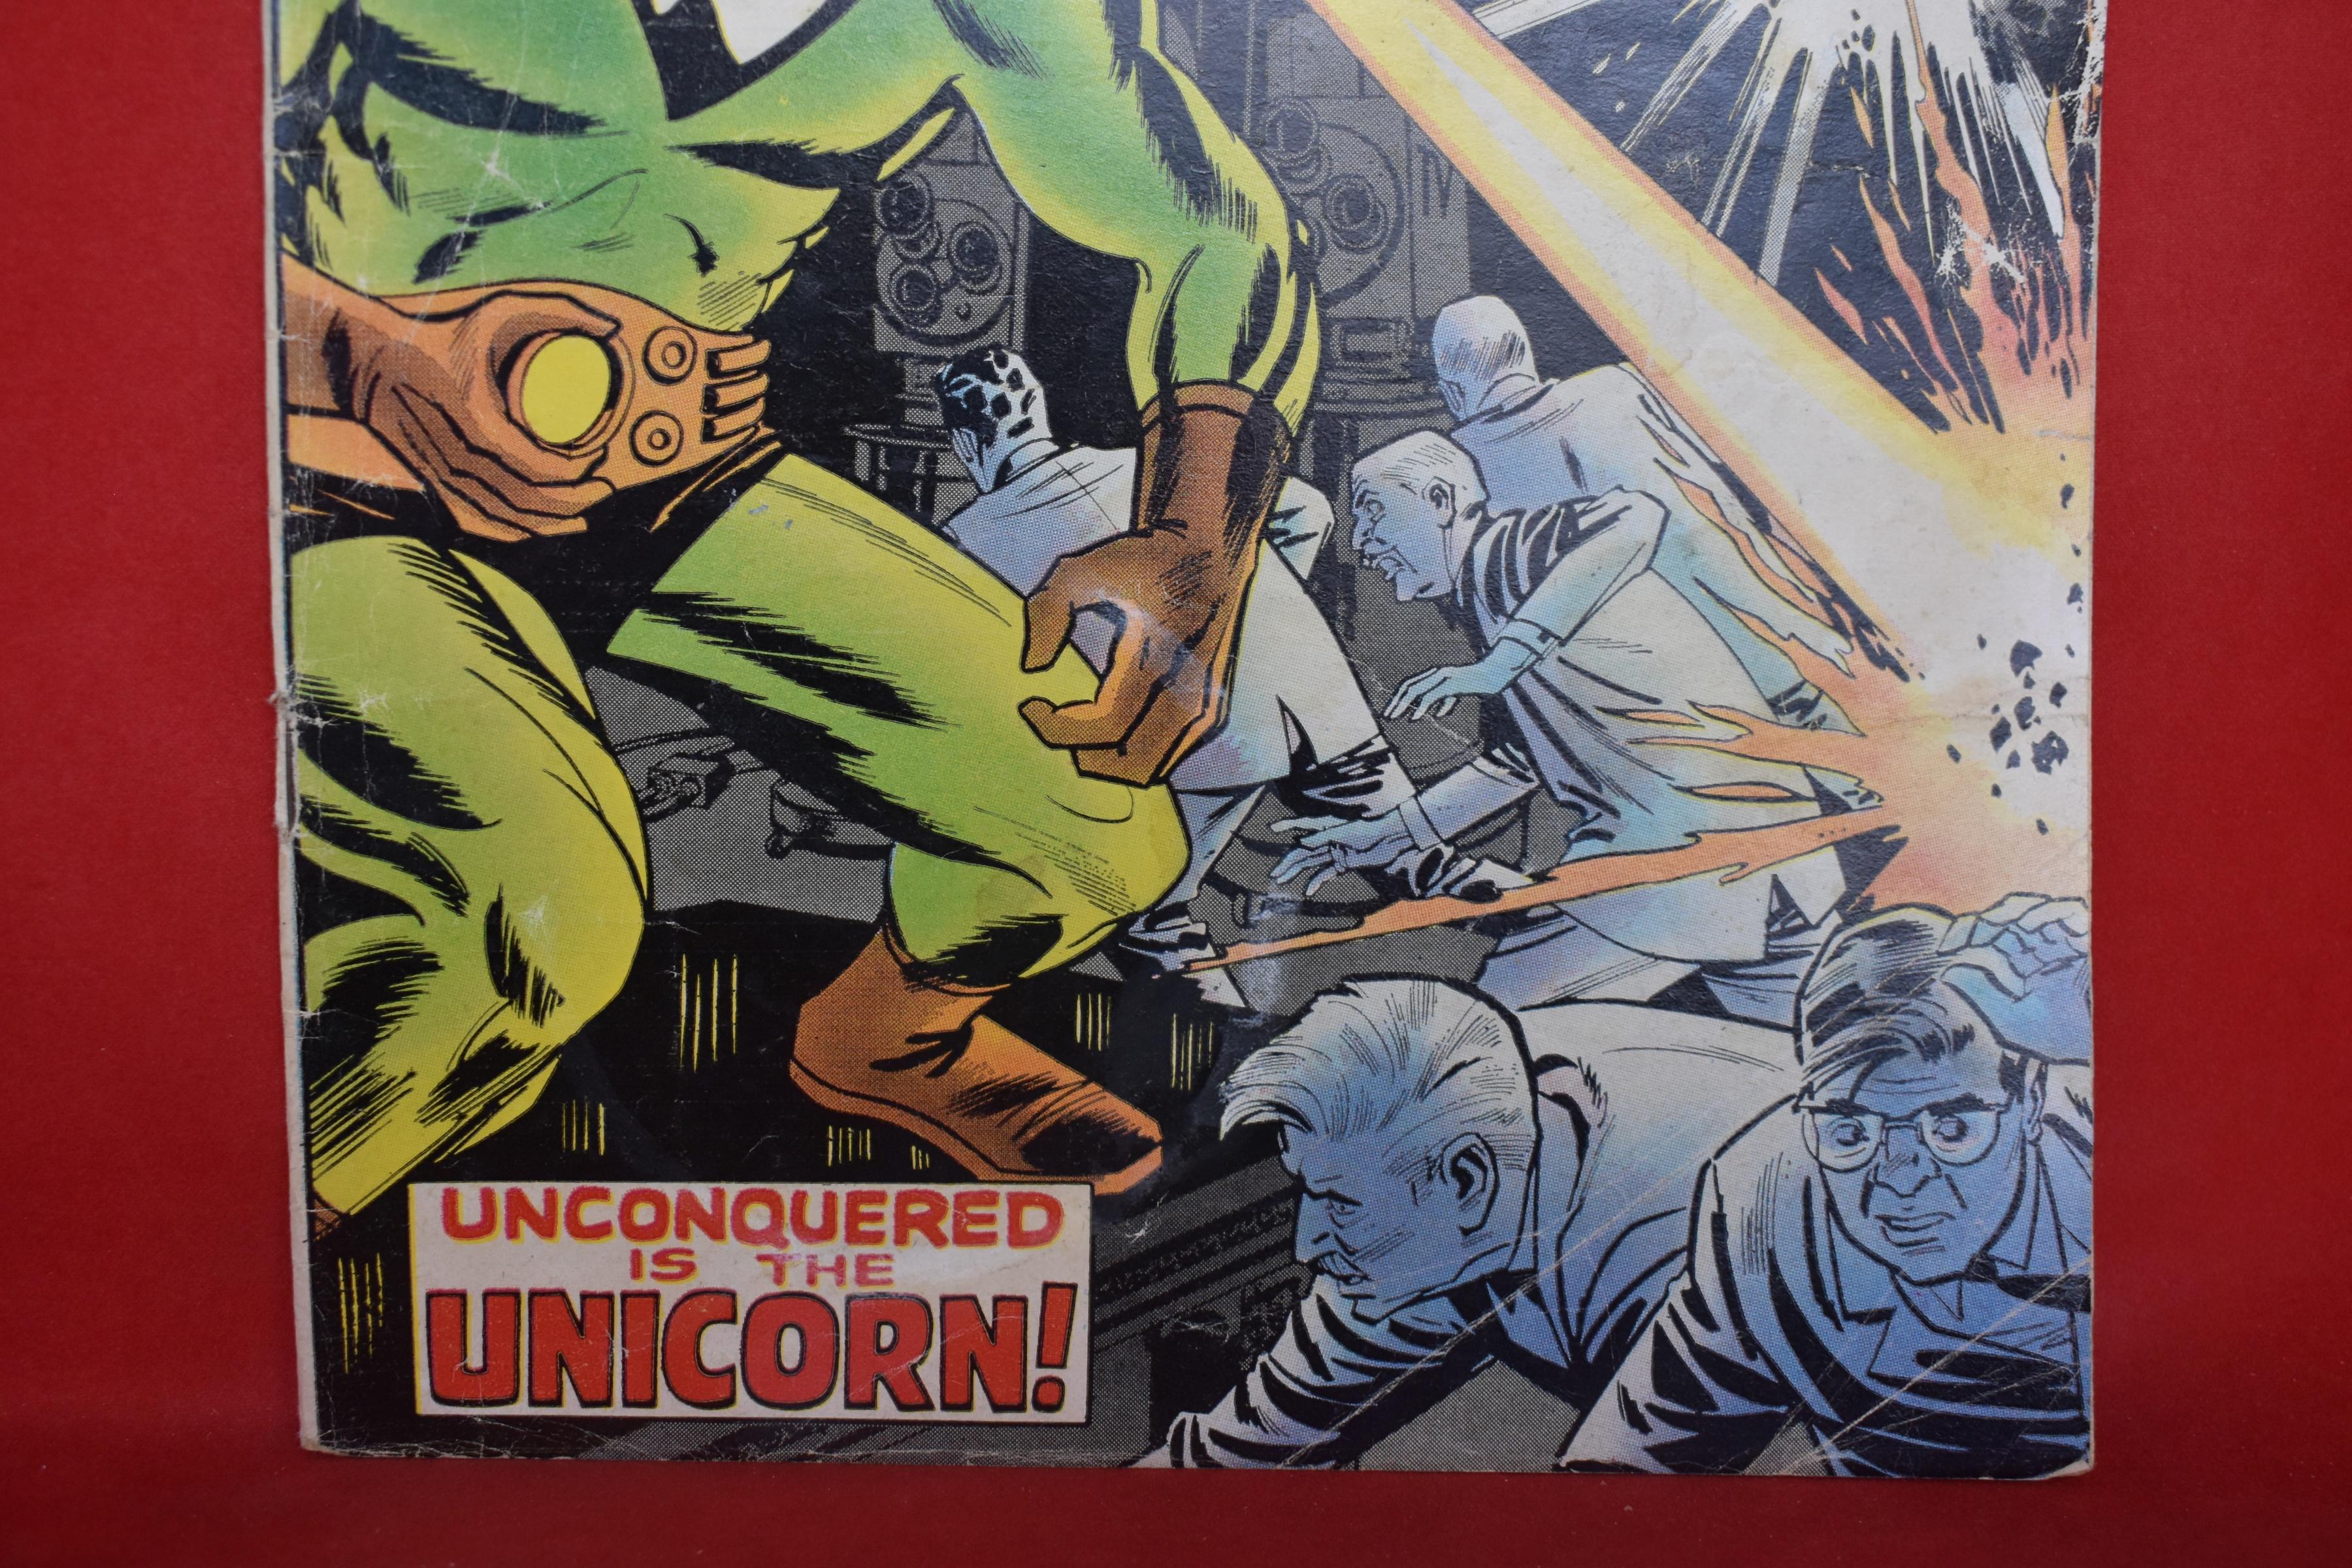 IRON MAN #4 | UNCONQUERED IS THE UNICORN! | ARCHIE GOODWIN - 1968